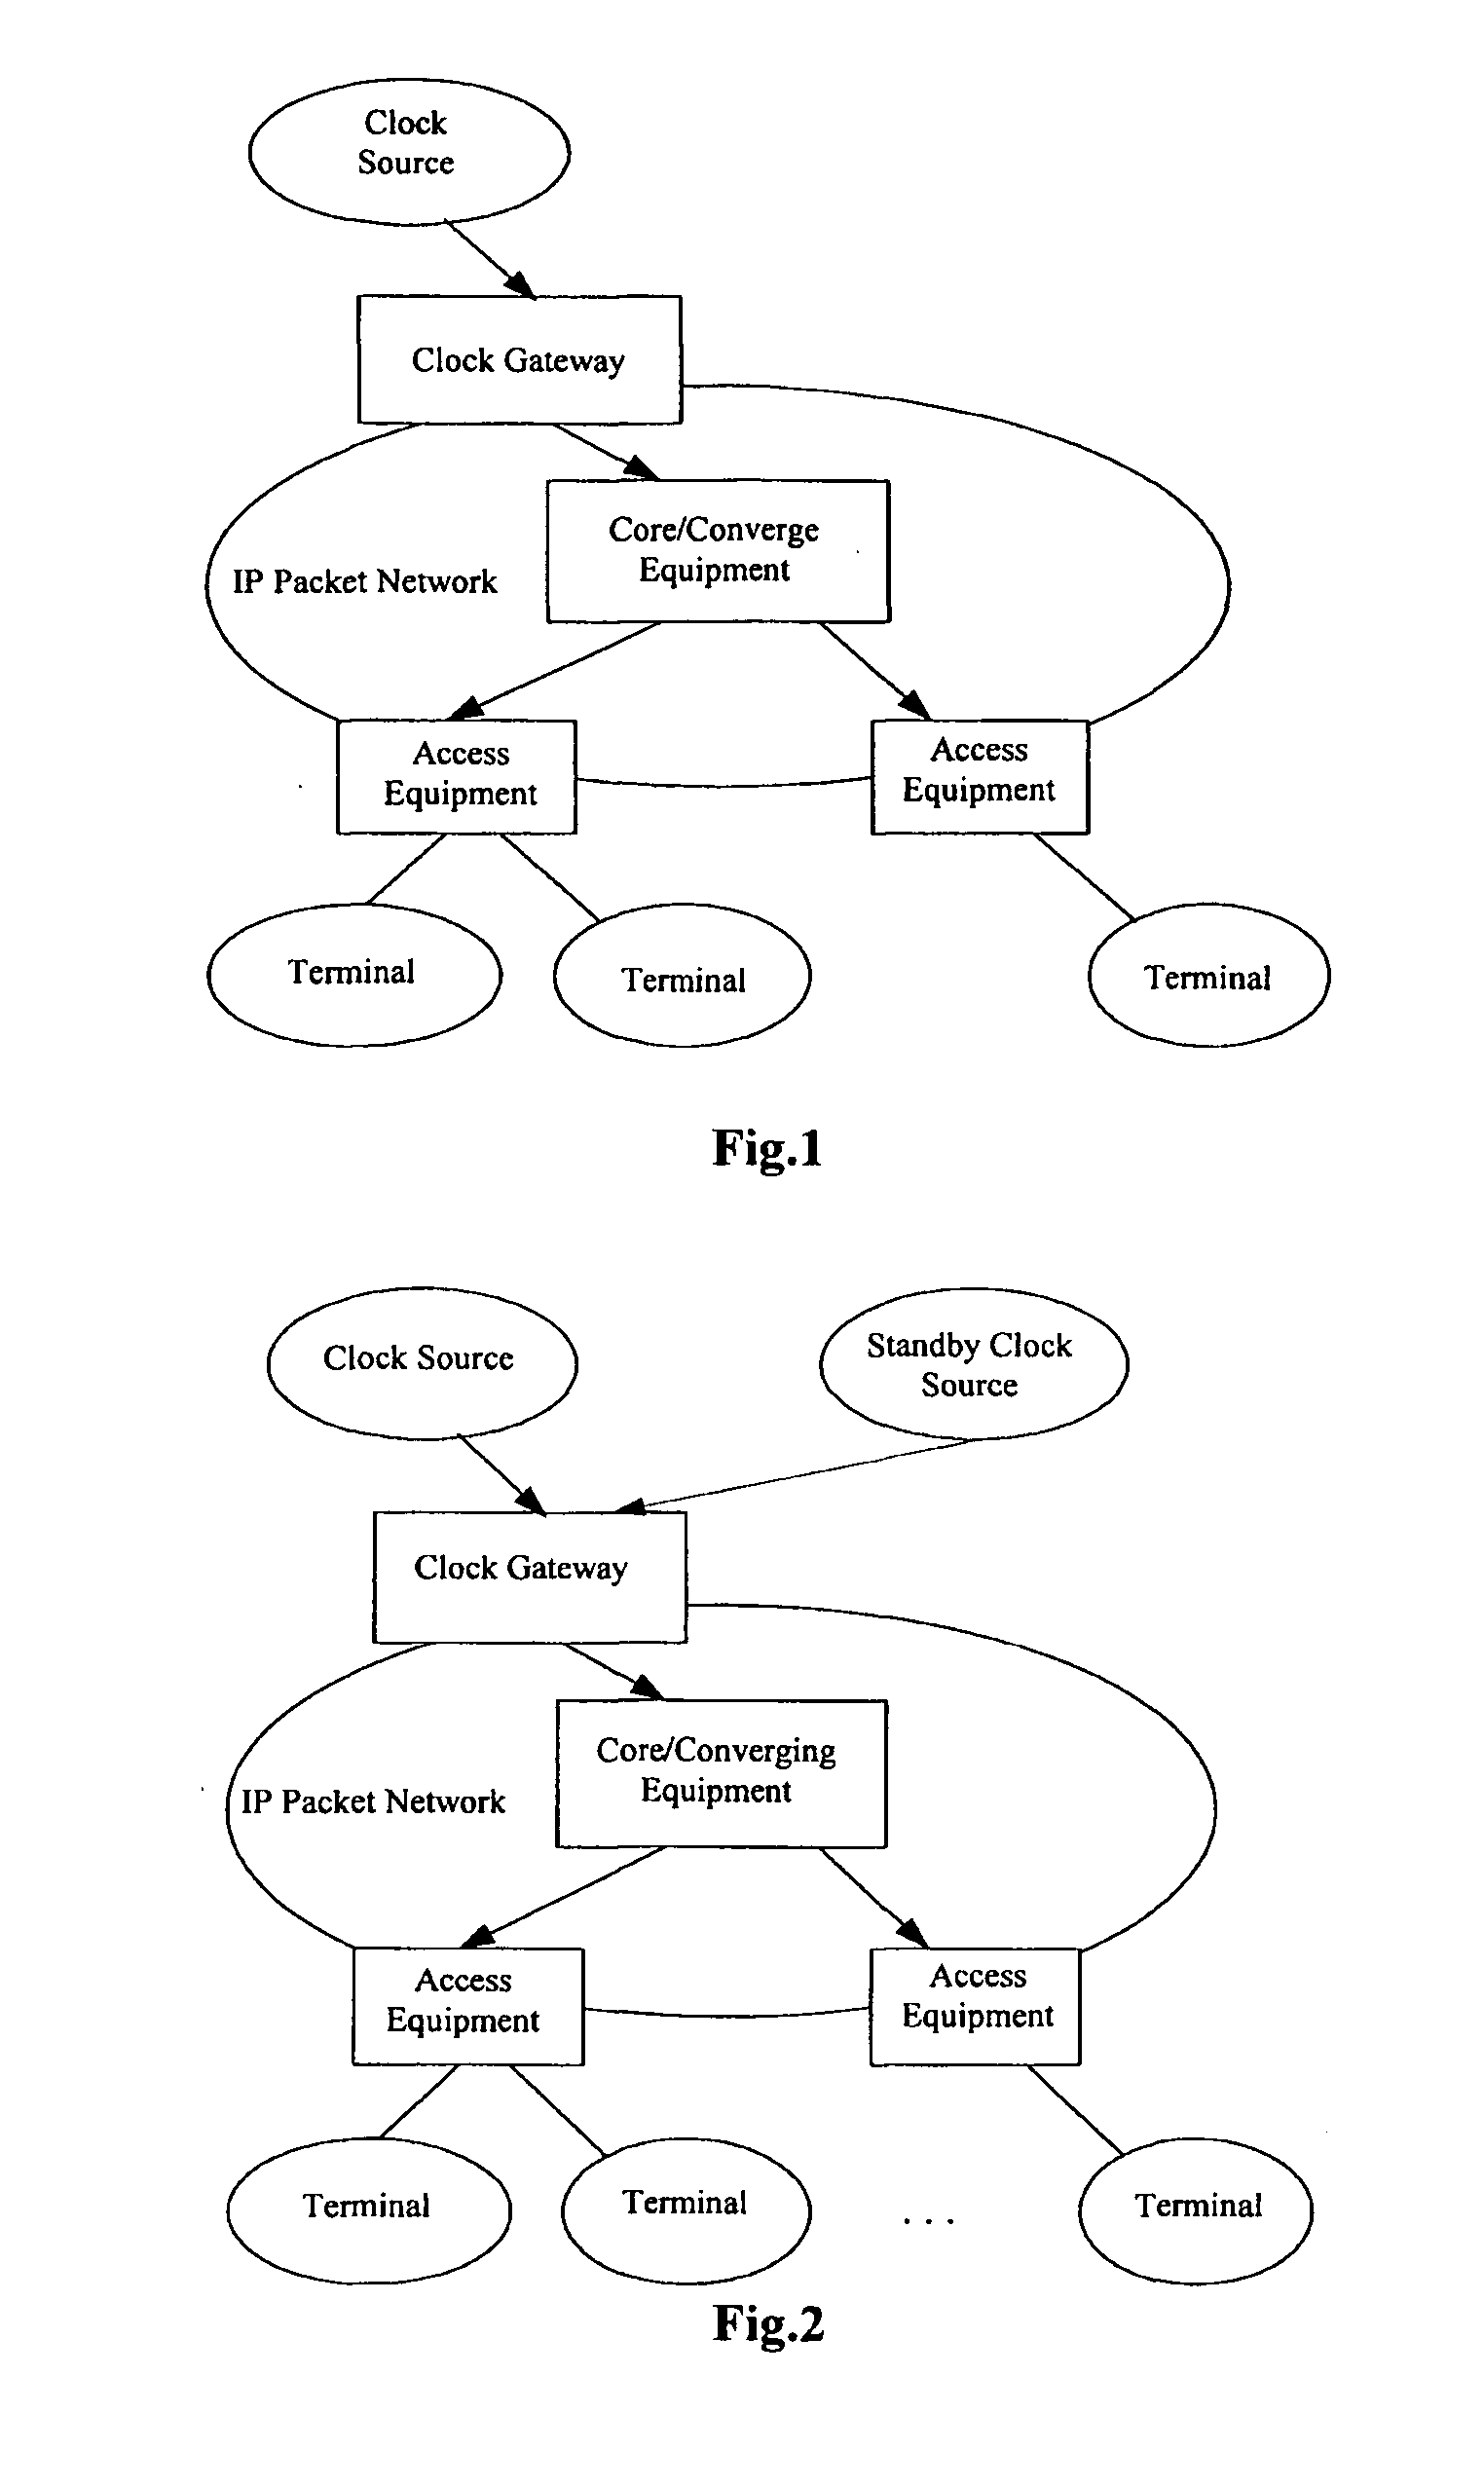 Method and system for providing clock synchronization over packet network